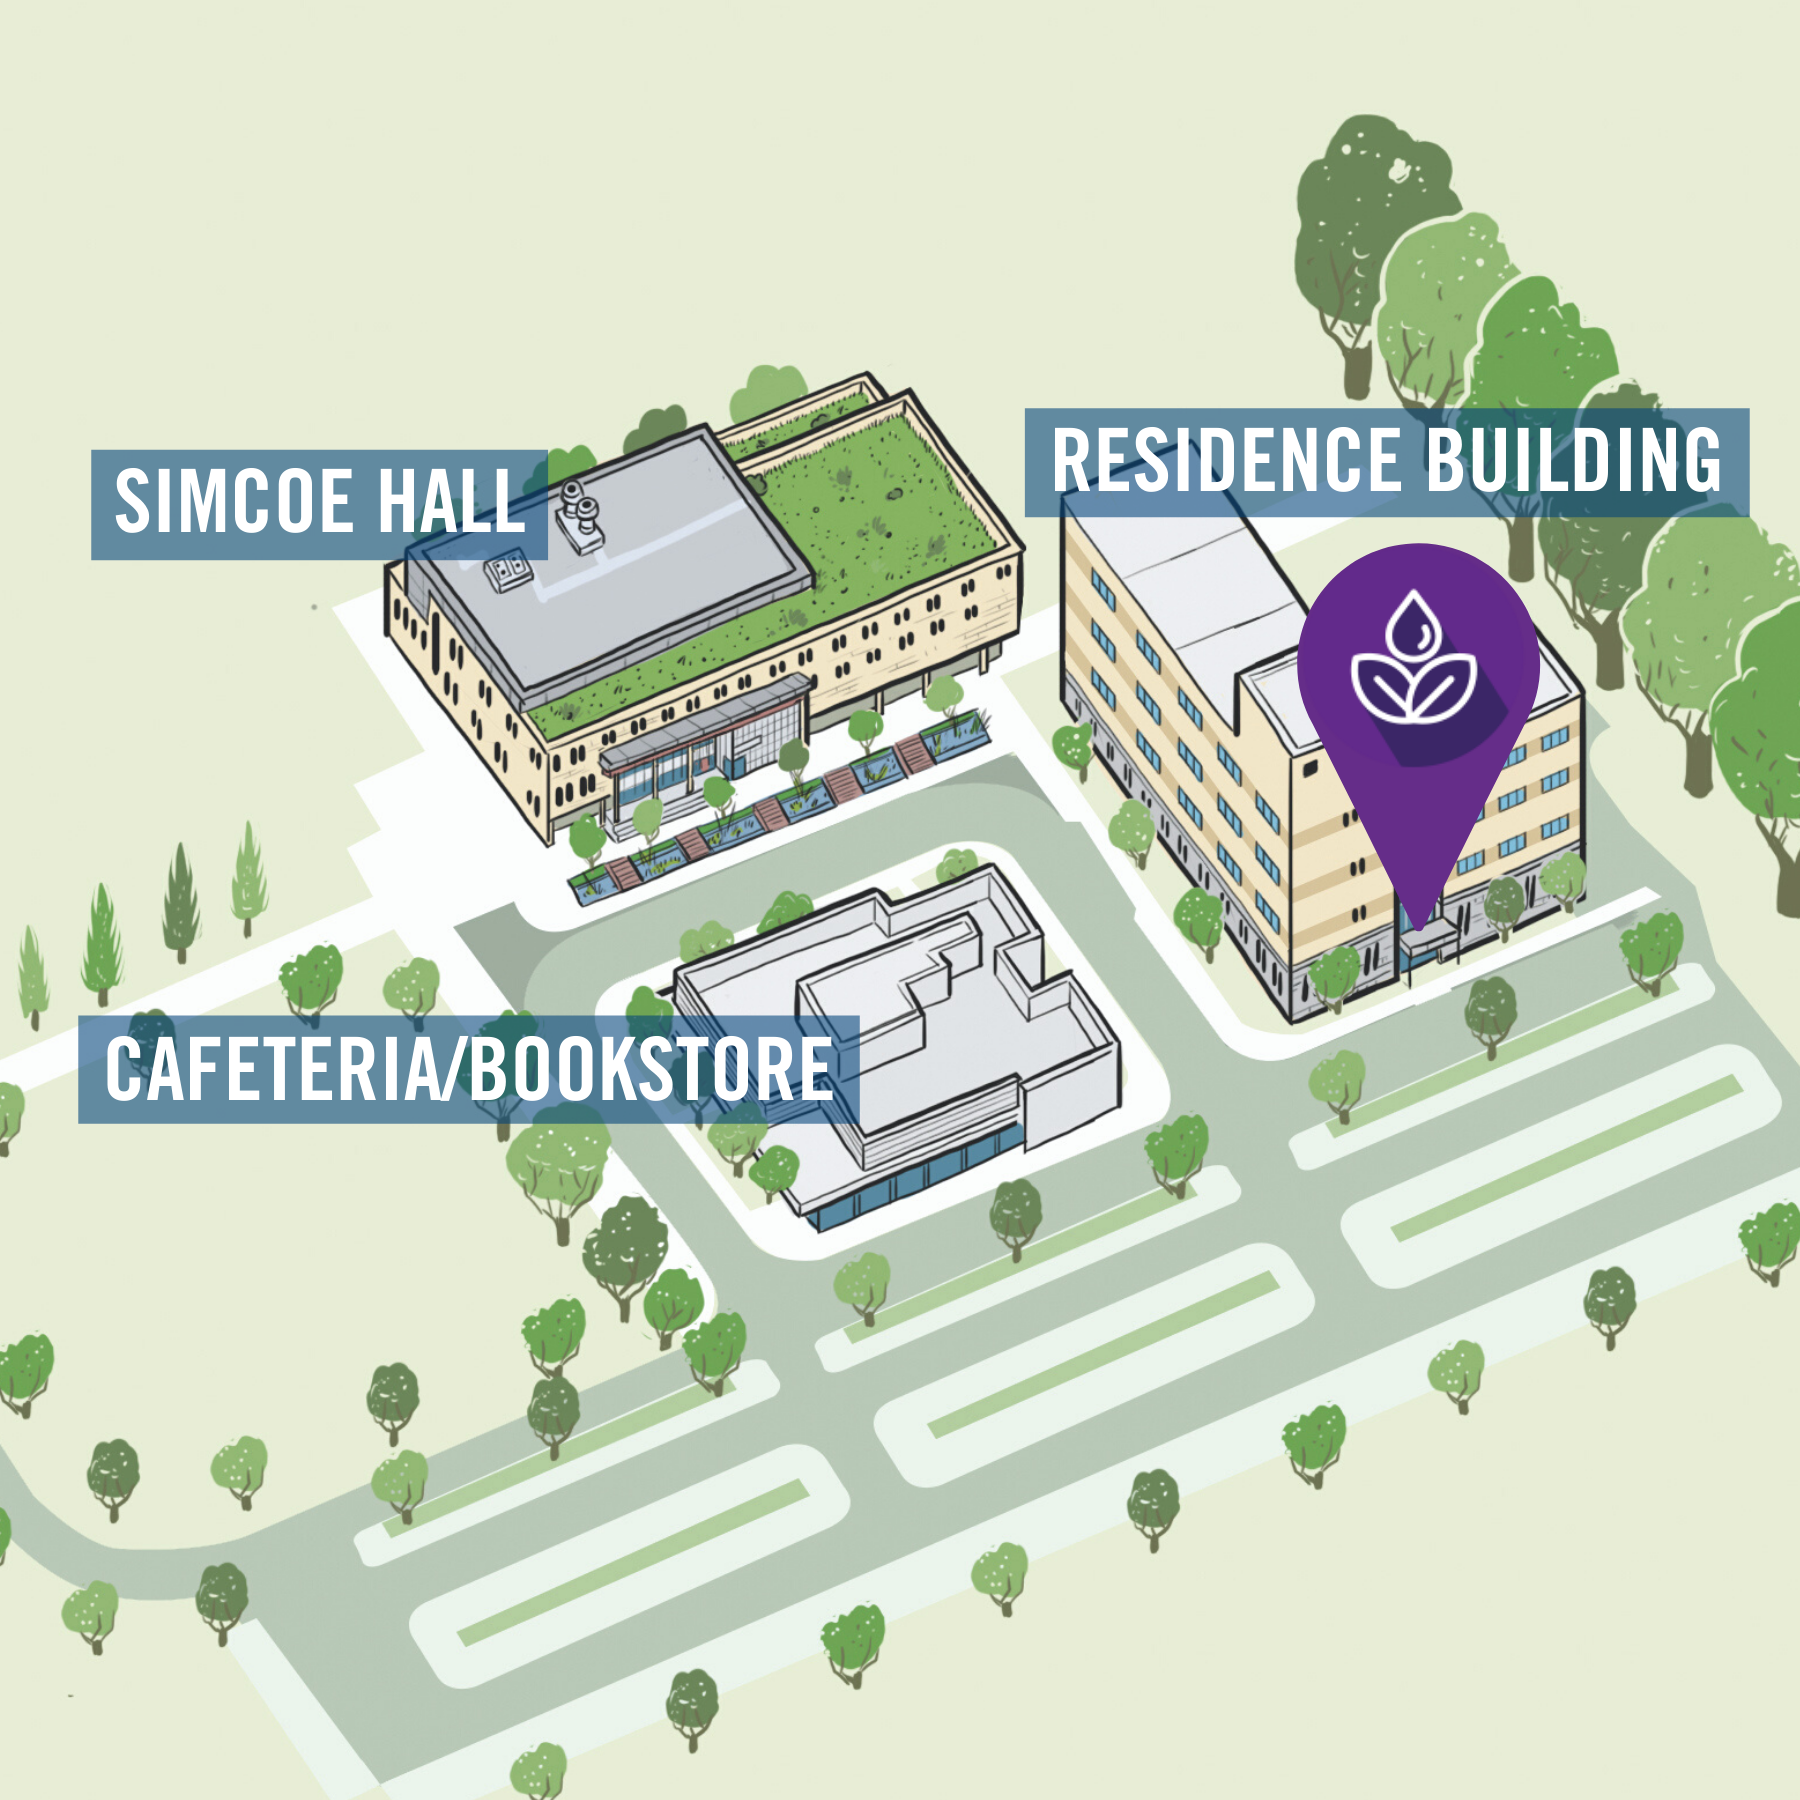 Orillia campus map with wellness centre location in the residence building